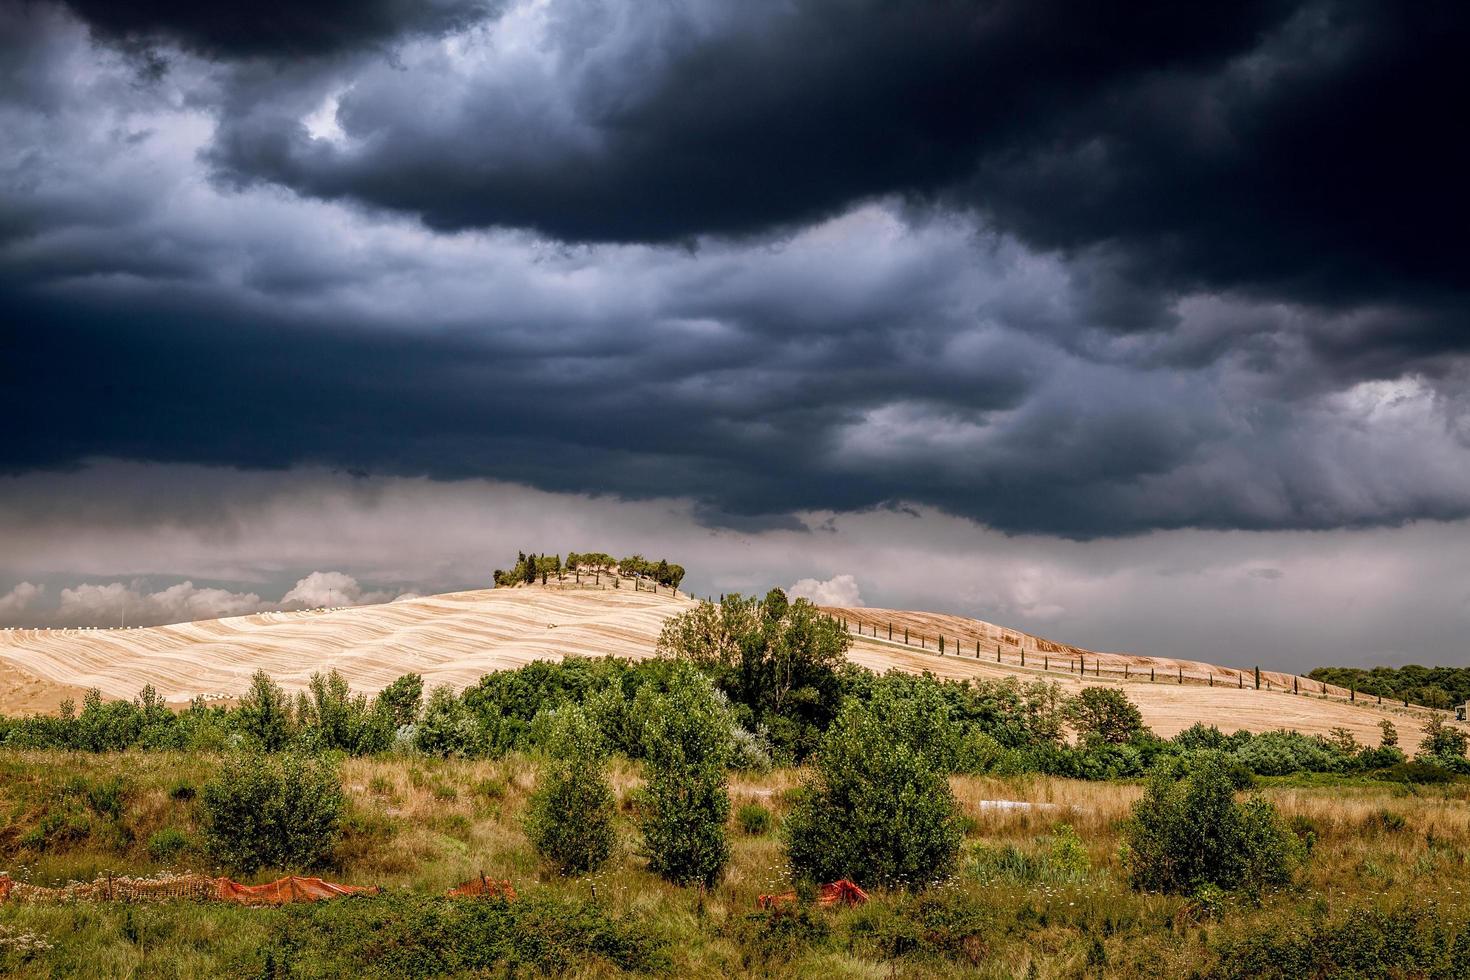 Tuscany, Italy, 2020 - House on a hill with storm clouds photo